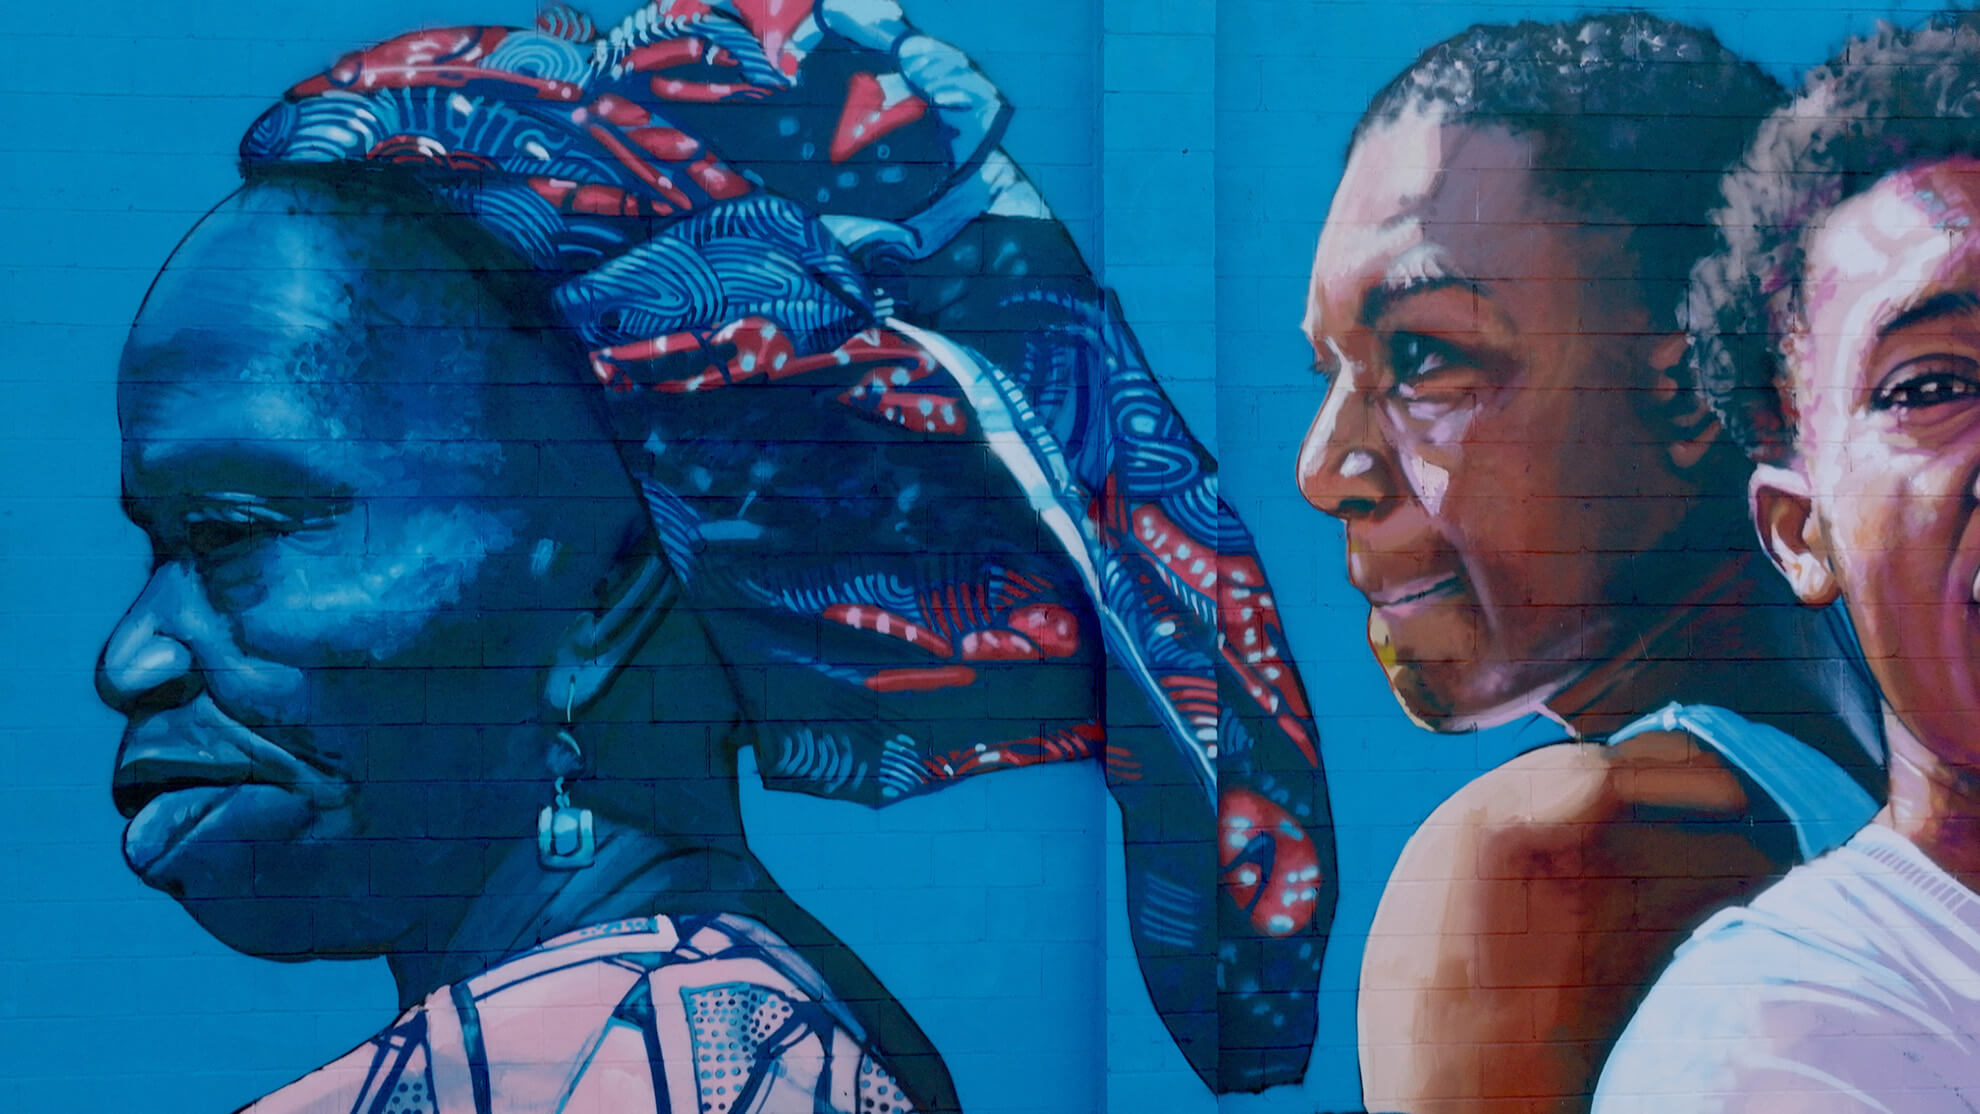 A close-up of the two women in the mural. The older woman on the left is rendered in more blue tones reminiscent of night while the younger woman on the right in bright tones resembling daylight.